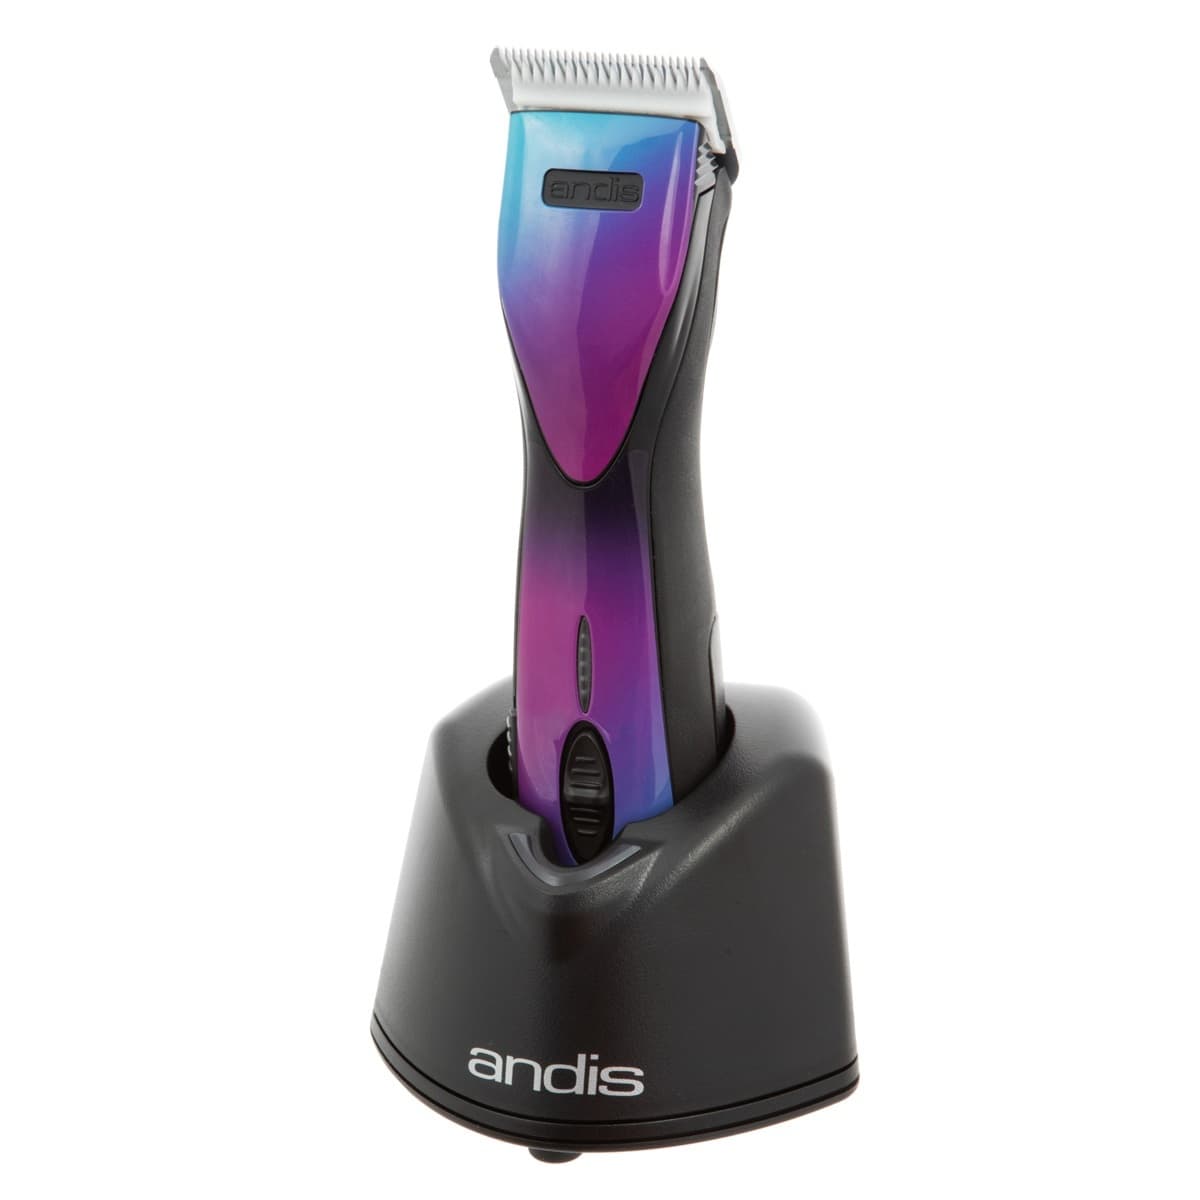 Andis DBLC-2 Pulse ZR  II 5-Speed, Detachable Blade Clipper, Cordless, Lithium Ion Battery - Purple Galaxy (Includes extra battery)